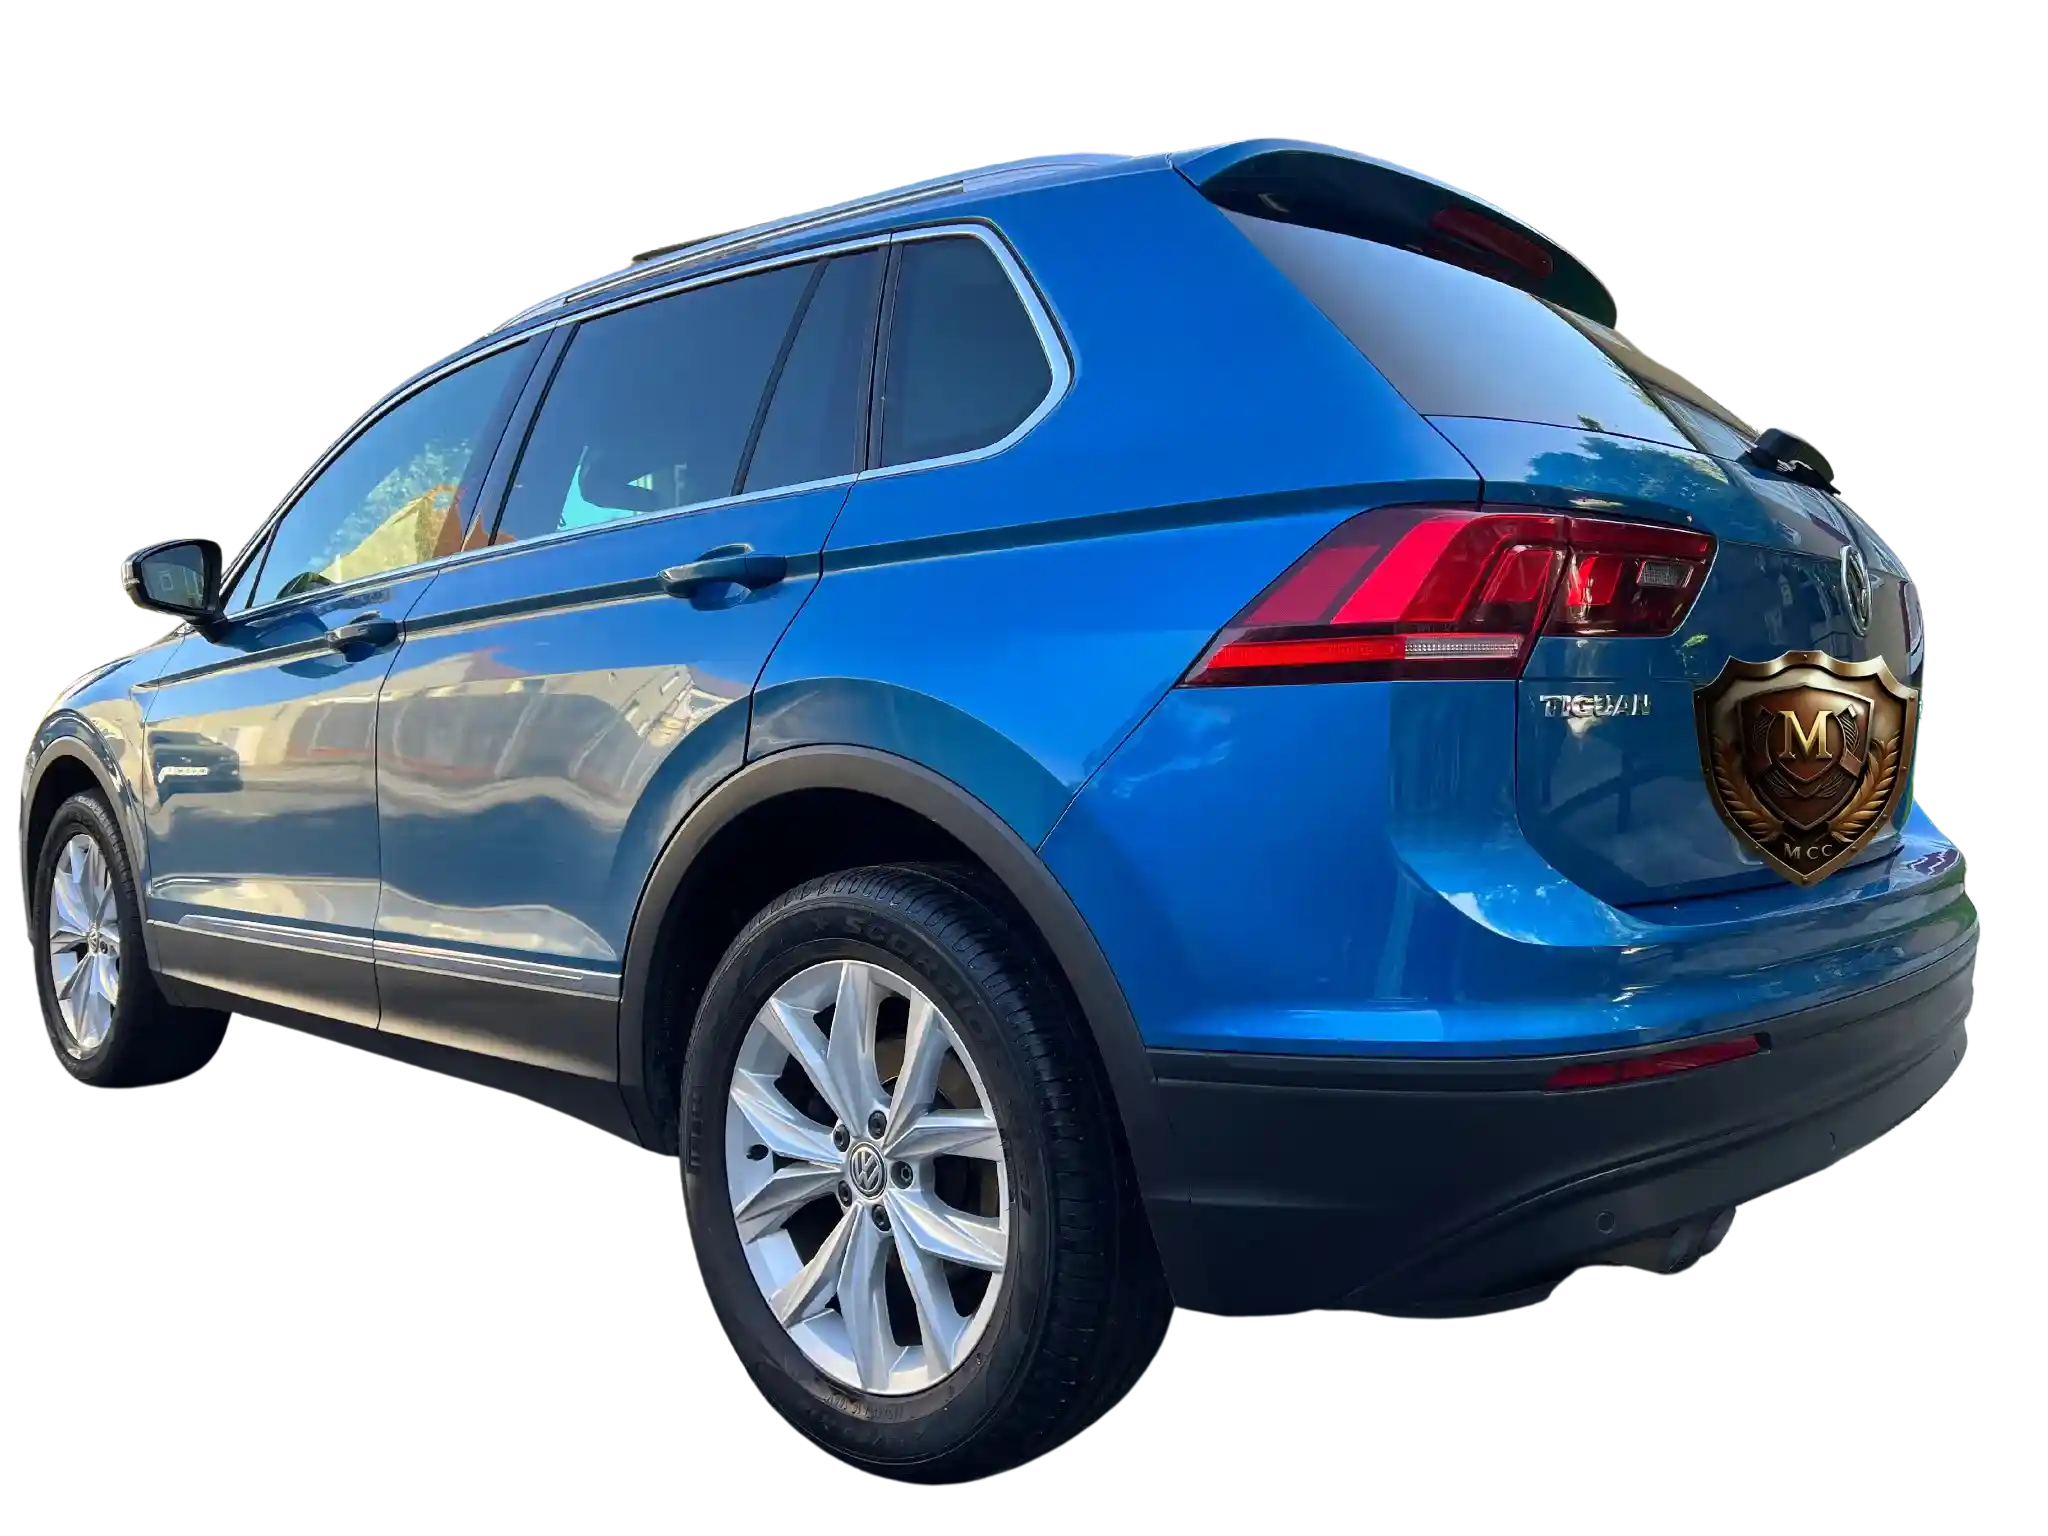 Eco-friendly waterless valeting of a Volkswagen Tiguan 4Motion in Teddington, enhancing its rugged elegance and reflecting corporate environmental values.